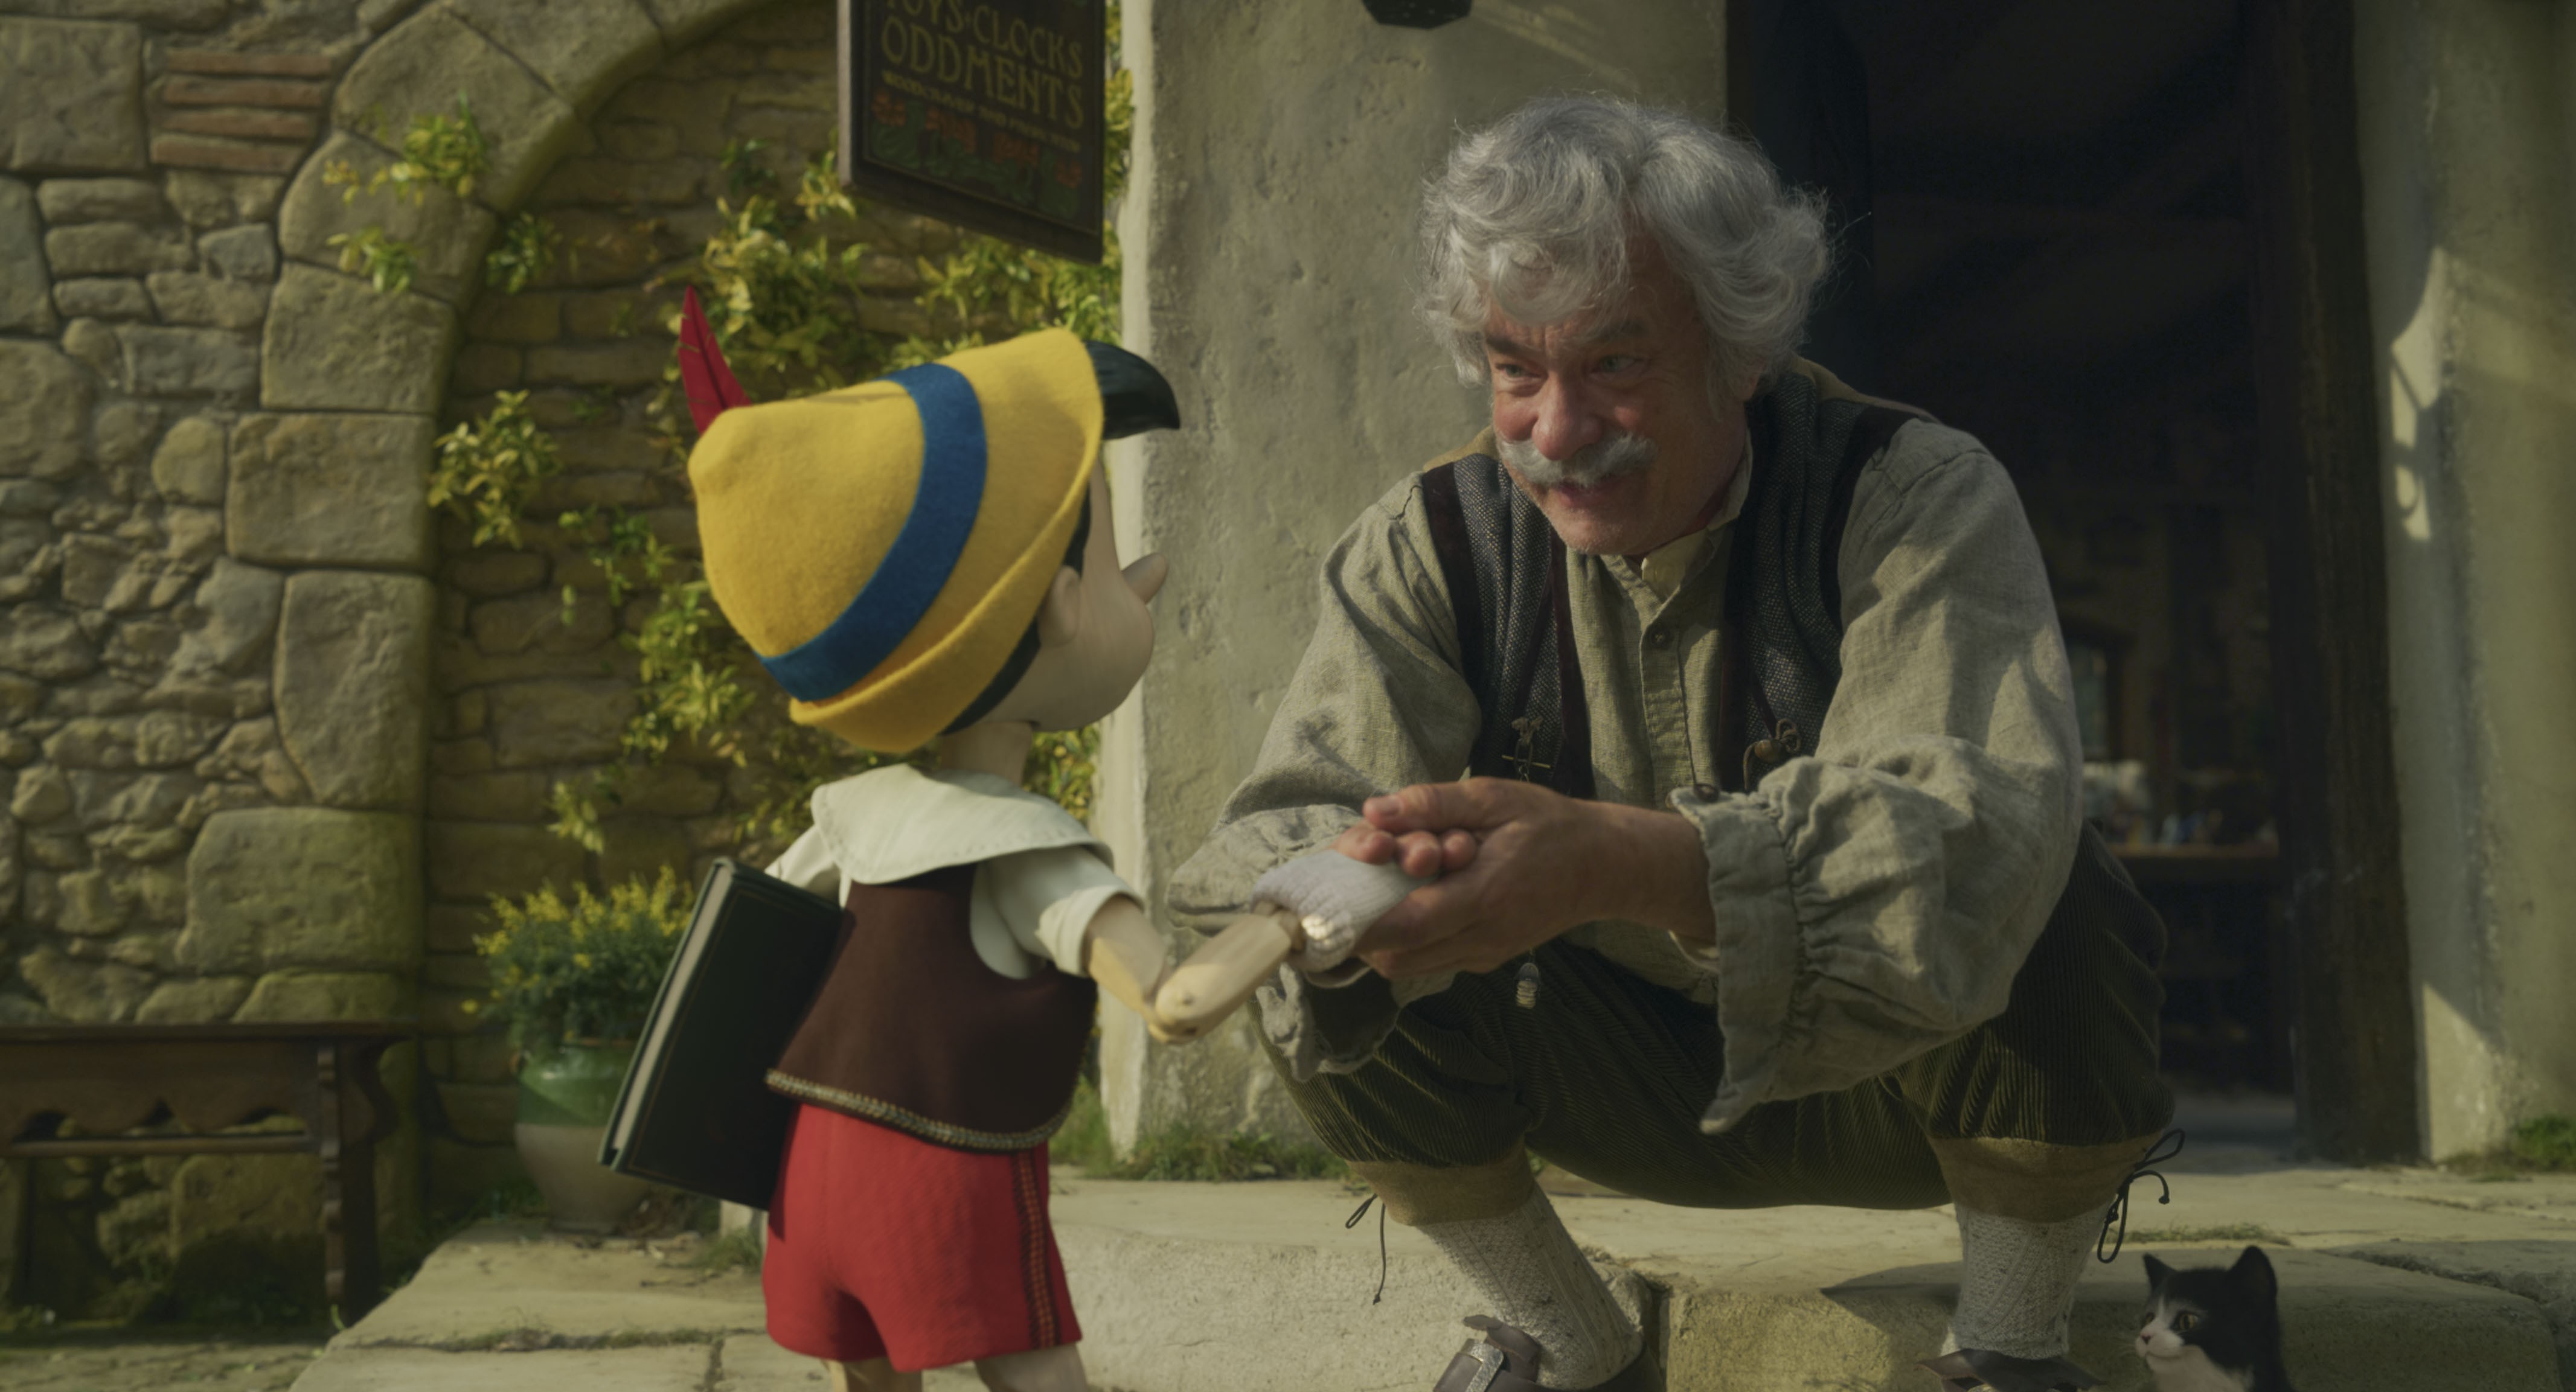 (L-R): Pinocchio (voiced by Benjamin Evan Ainsworth), Tom Hanks as Geppetto, and Figaro in Disney's live-action PINOCCHIO, exclusively on Disney+. Photo courtesy of Disney Enterprises, Inc. © 2022 Disney Enterprises, Inc. All Rights Reserved. (Foto: DISNEY)